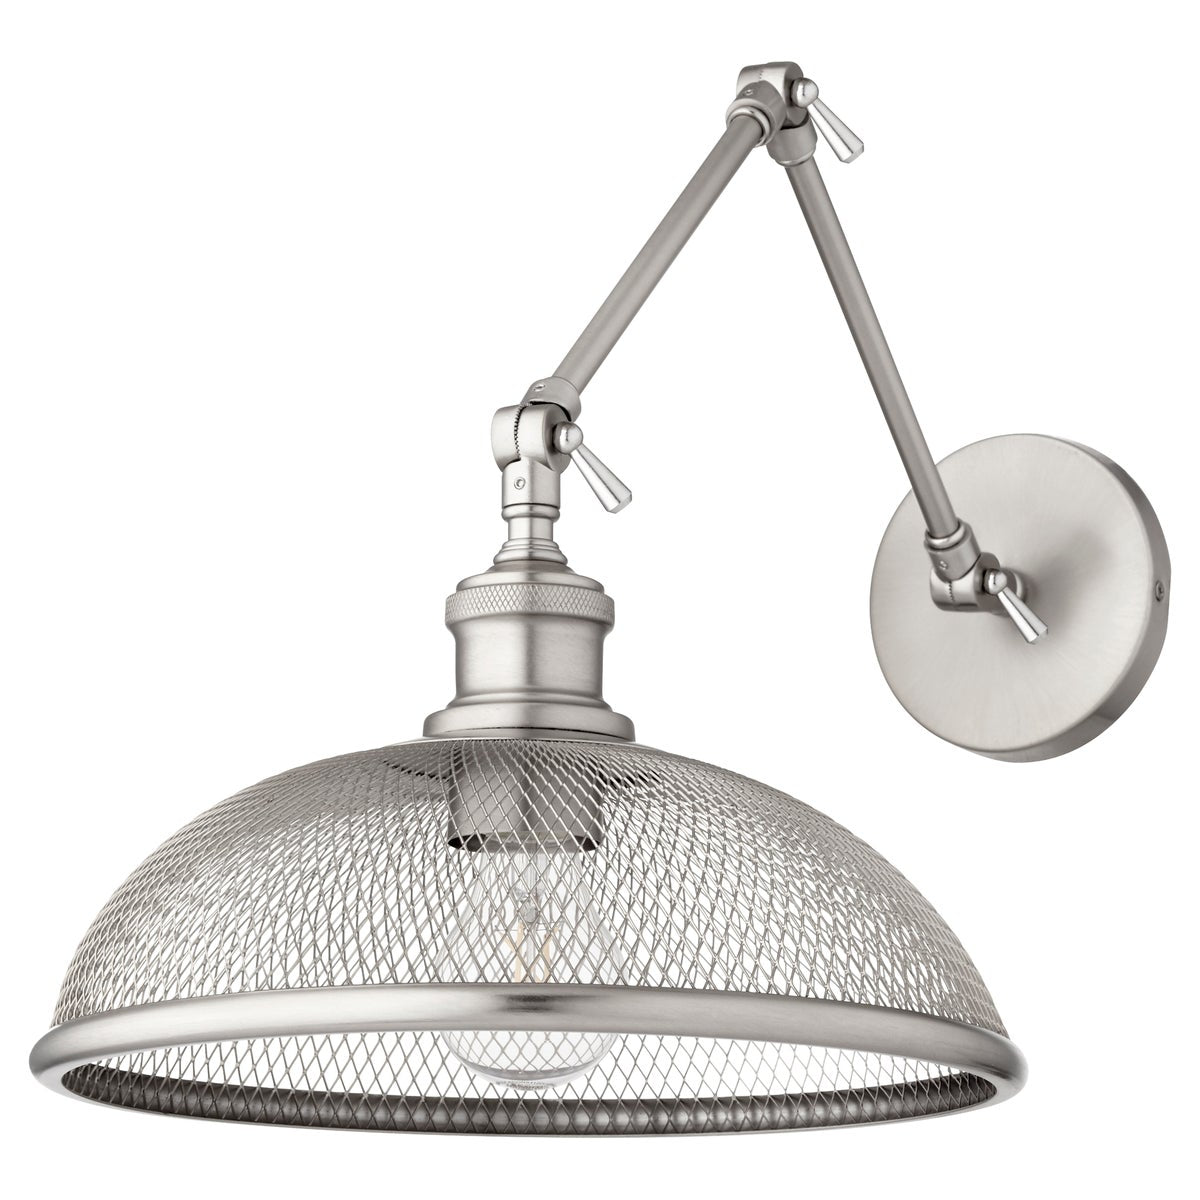 Industrial Wall Sconce with wire mesh shade and subtly shaded bulbs, showcasing crisscross patterns and repeating angles. Transitional styling for contemporary and traditional settings. Brand: Quorum International.